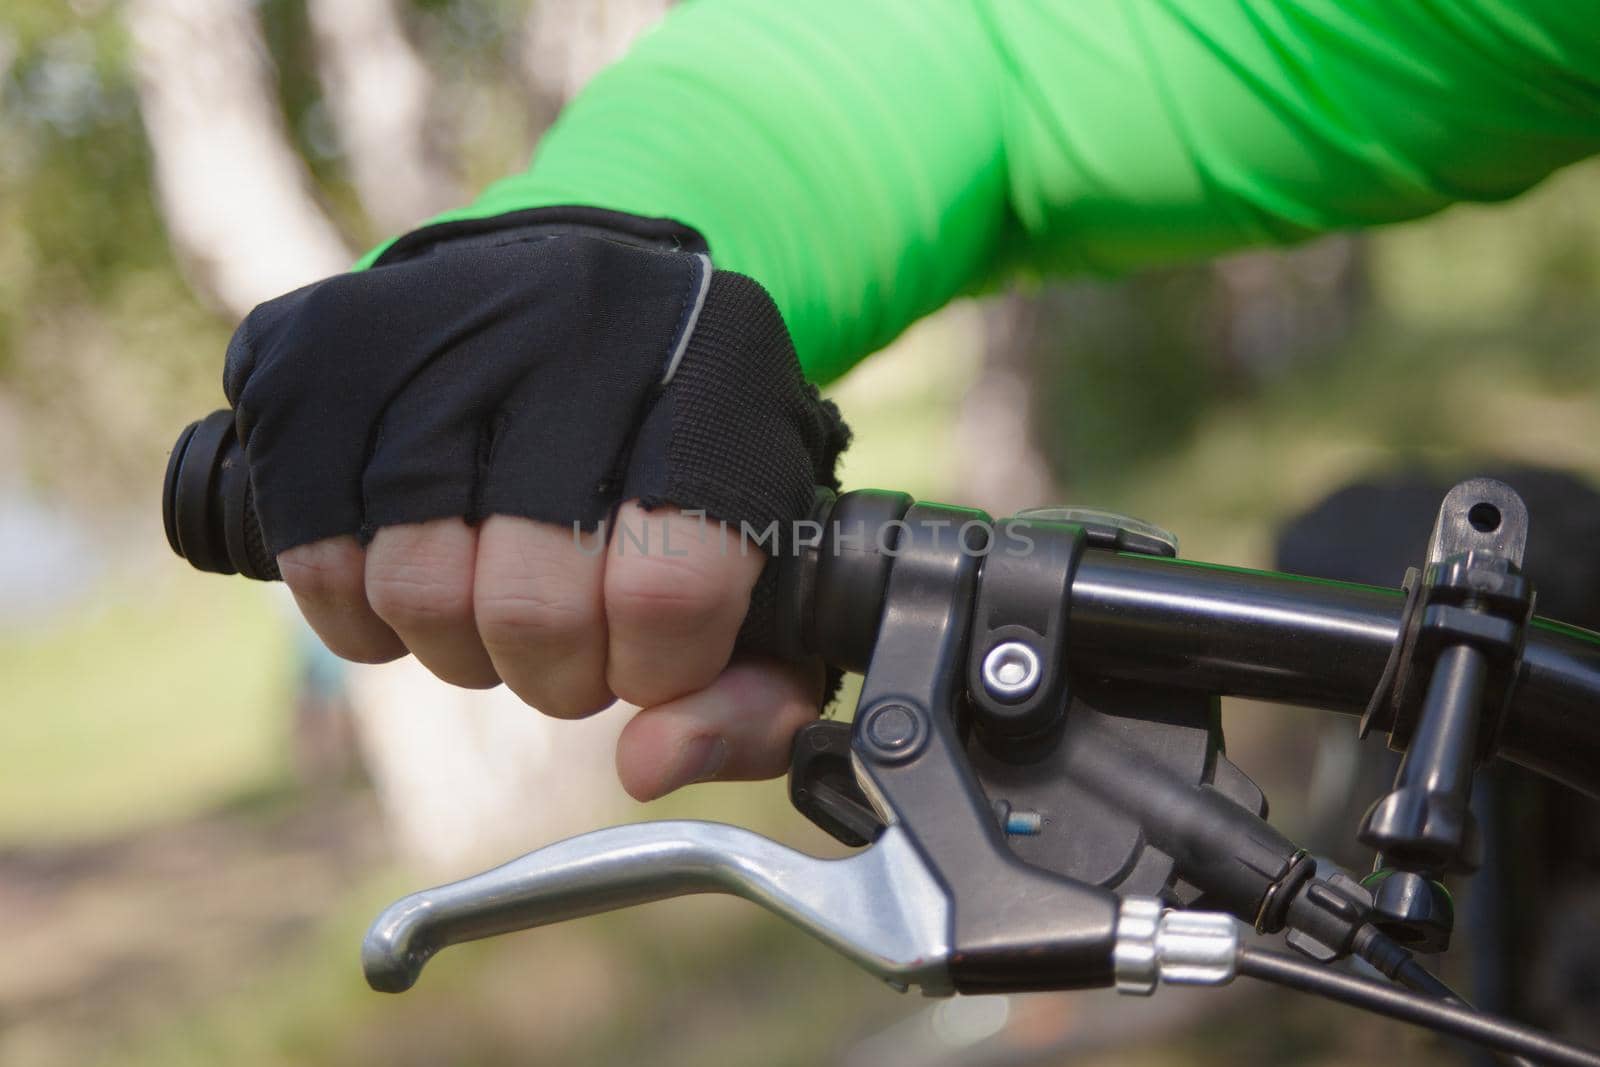 A gloved hand holds the handlebars firmly. High quality photo